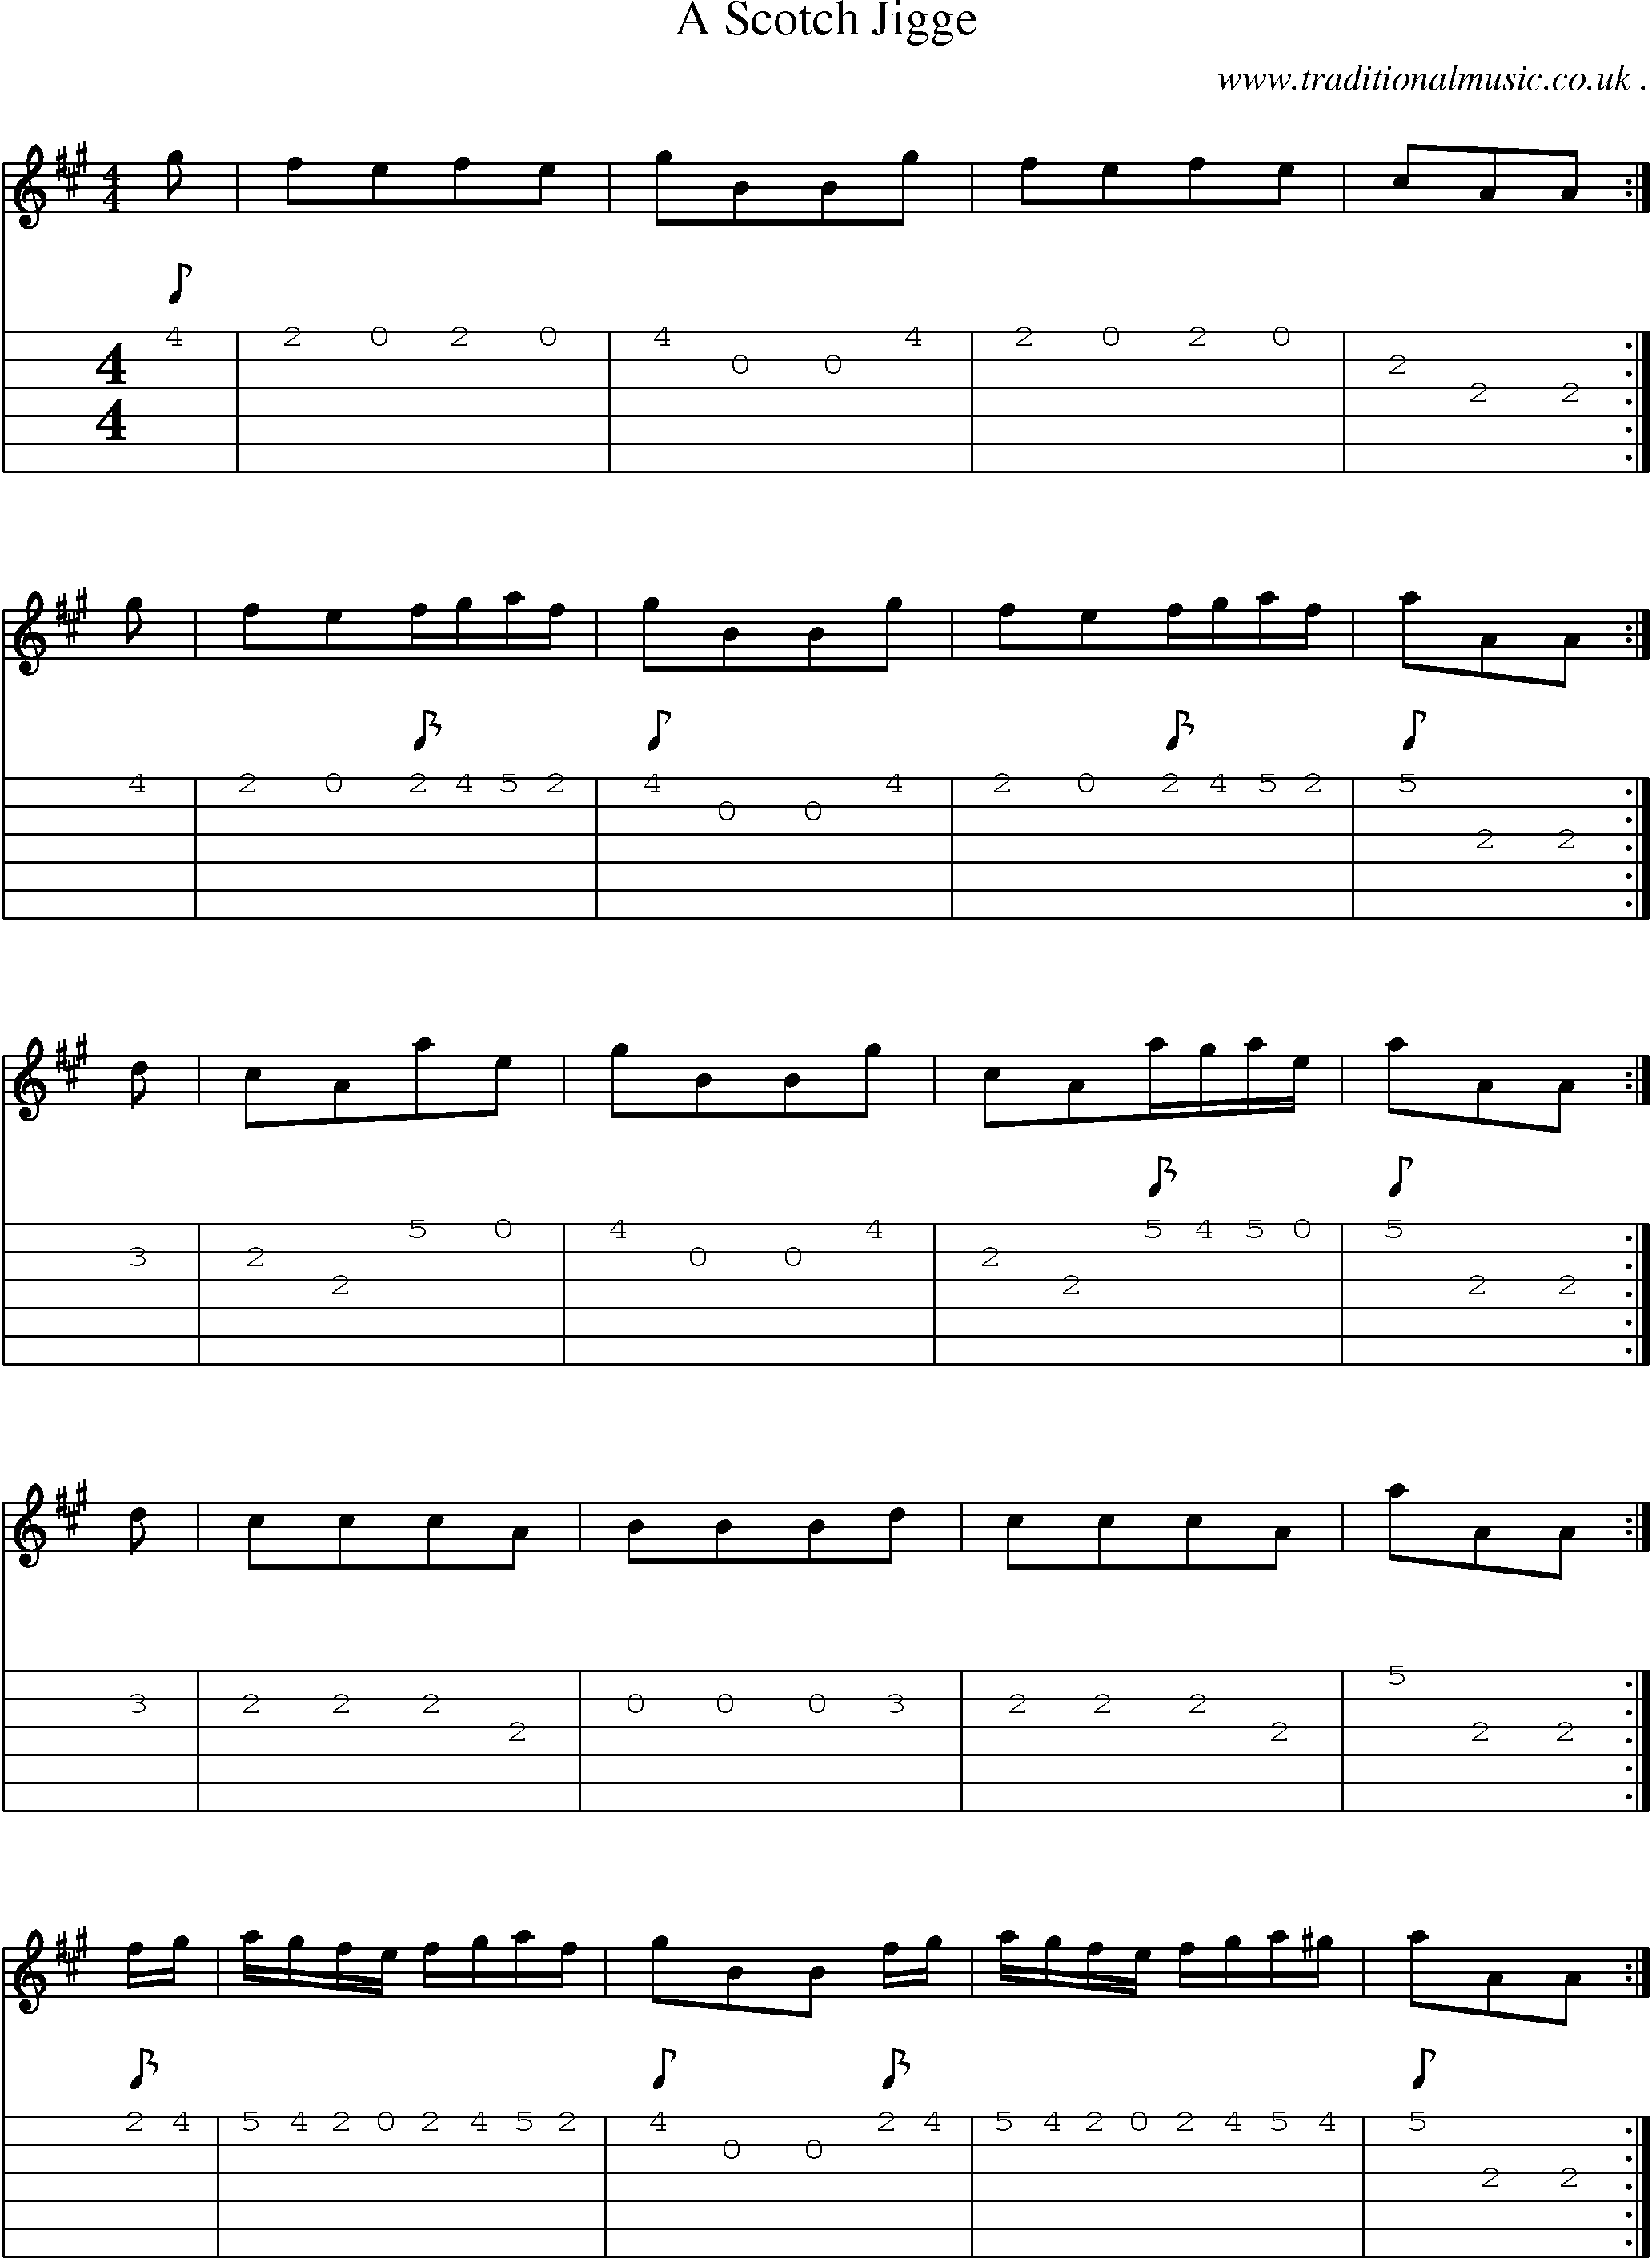 Sheet-music  score, Chords and Guitar Tabs for A Scotch Jigge